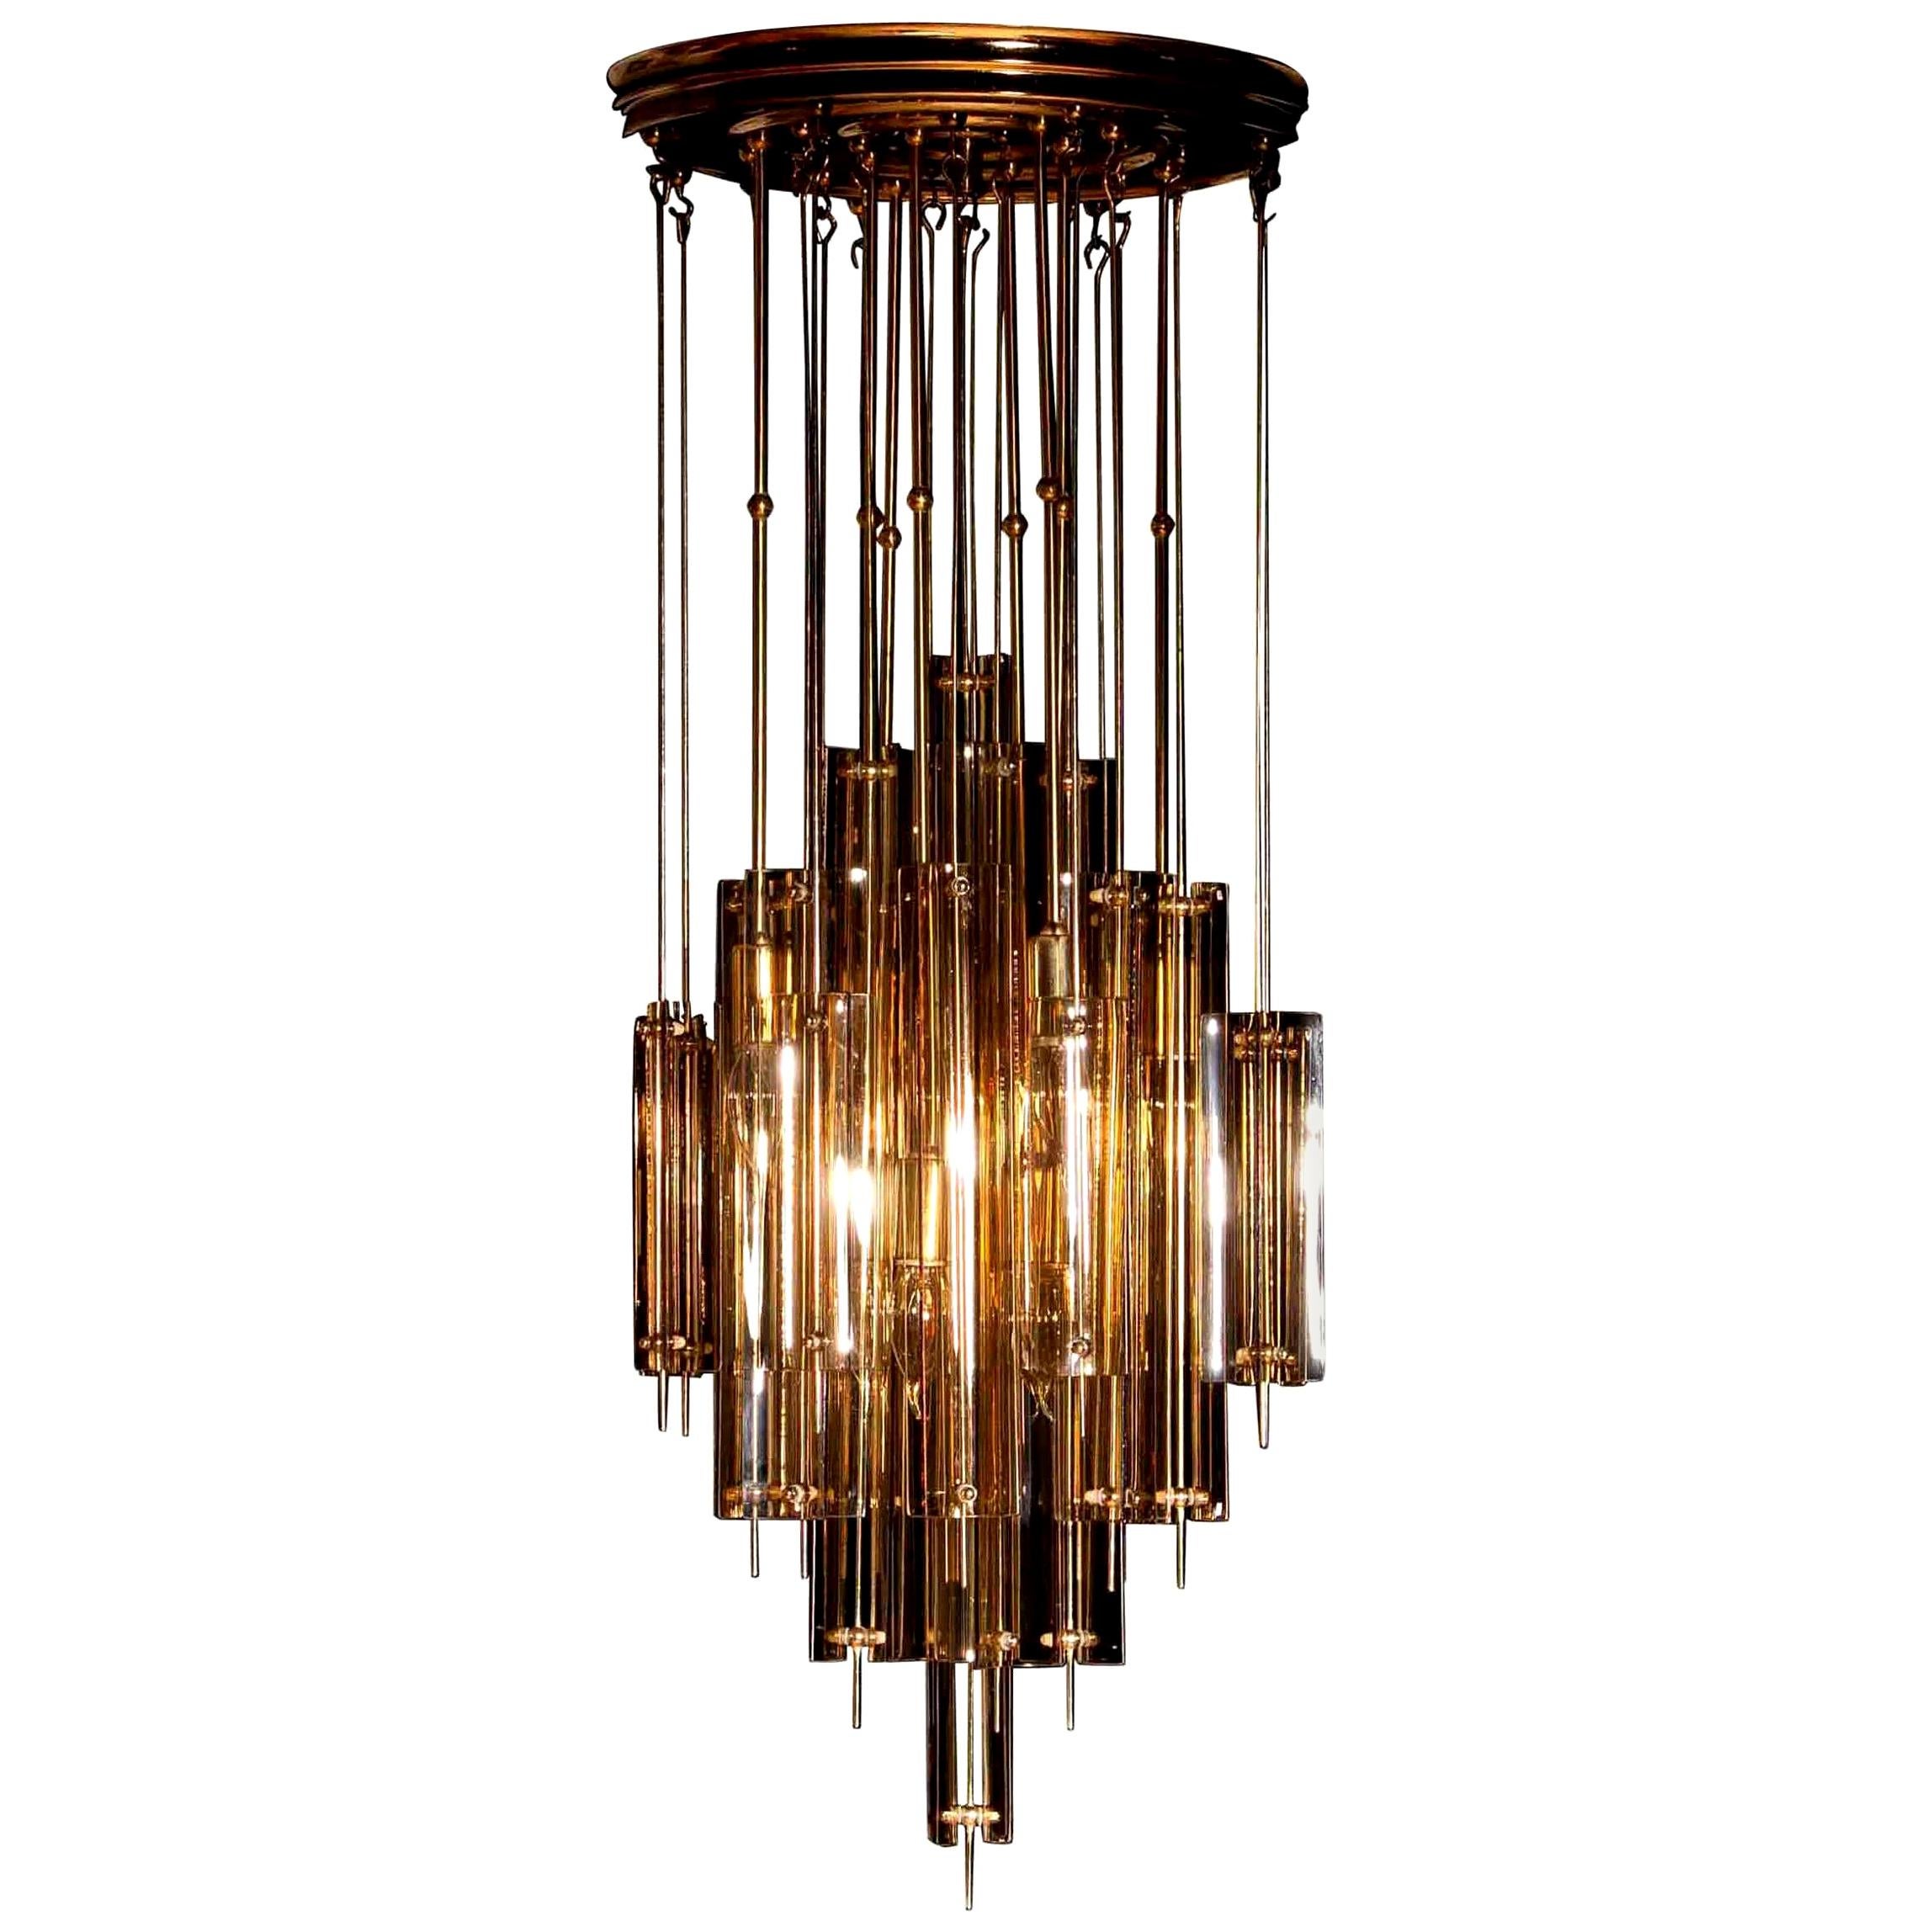 Mid-Century Modern 1960s Brass Chandelier with Smoked Glass by Verner Panton